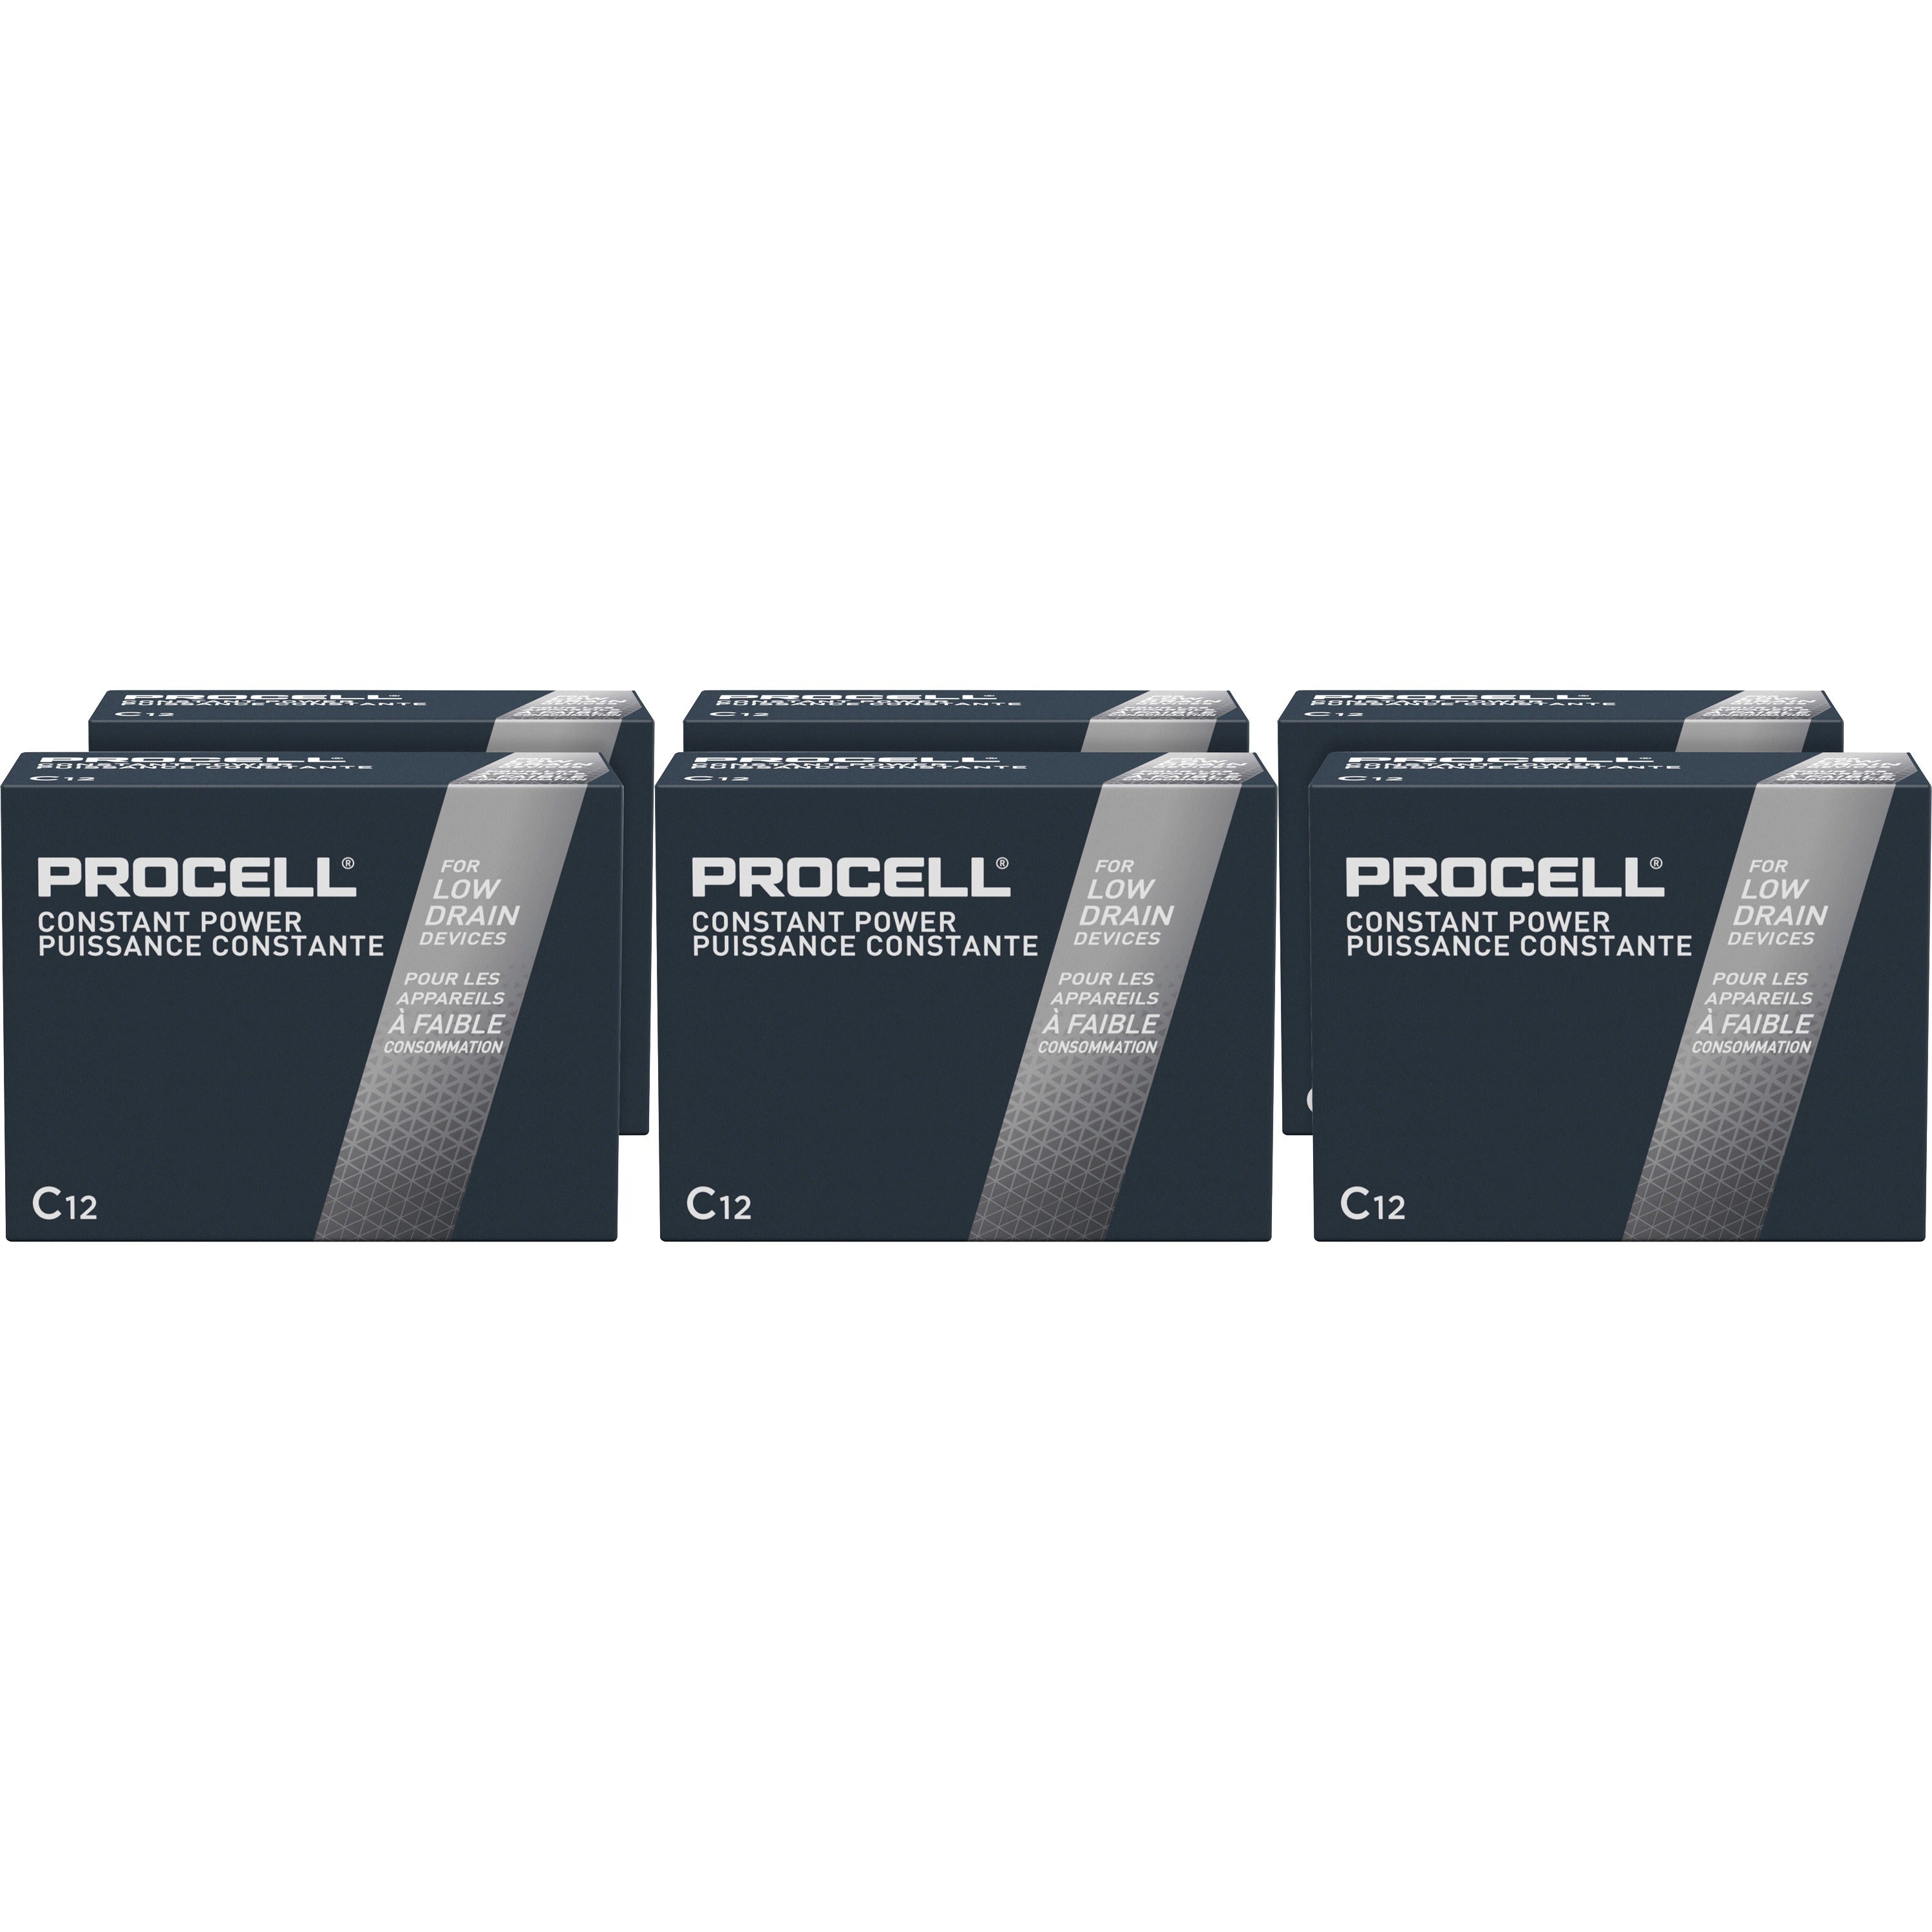 duracell-procell-alkaline-c-battery-boxes-of-12-for-multipurpose-c-7000-mah-15-v-dc-72-carton_durpc1400ct - 1